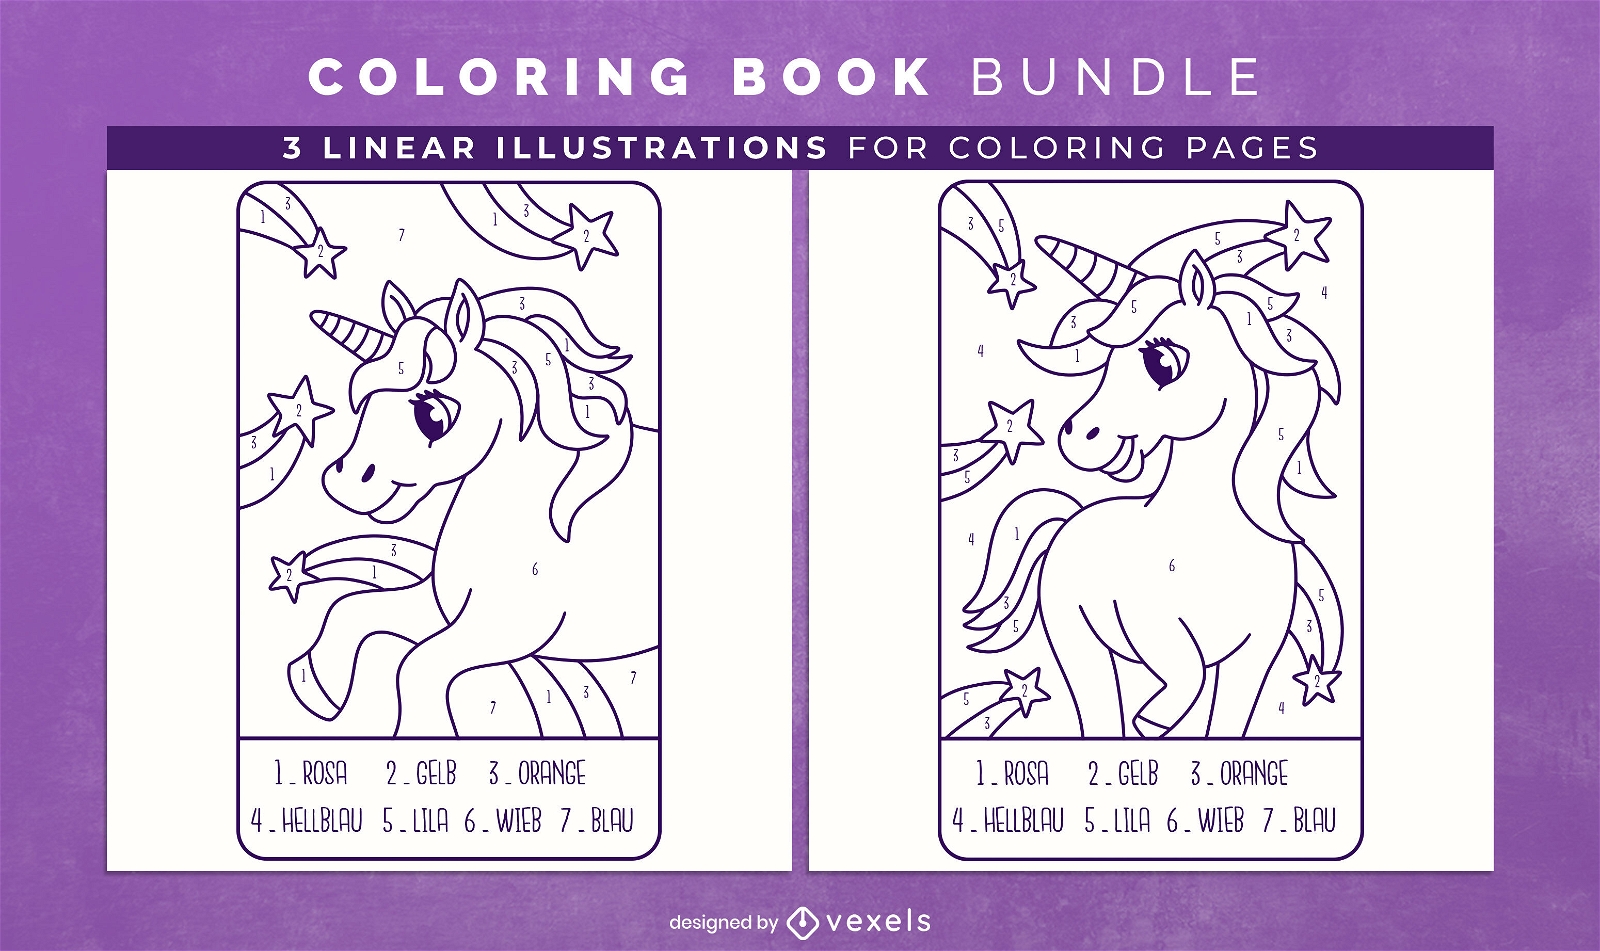 Unicorn by number coloring book